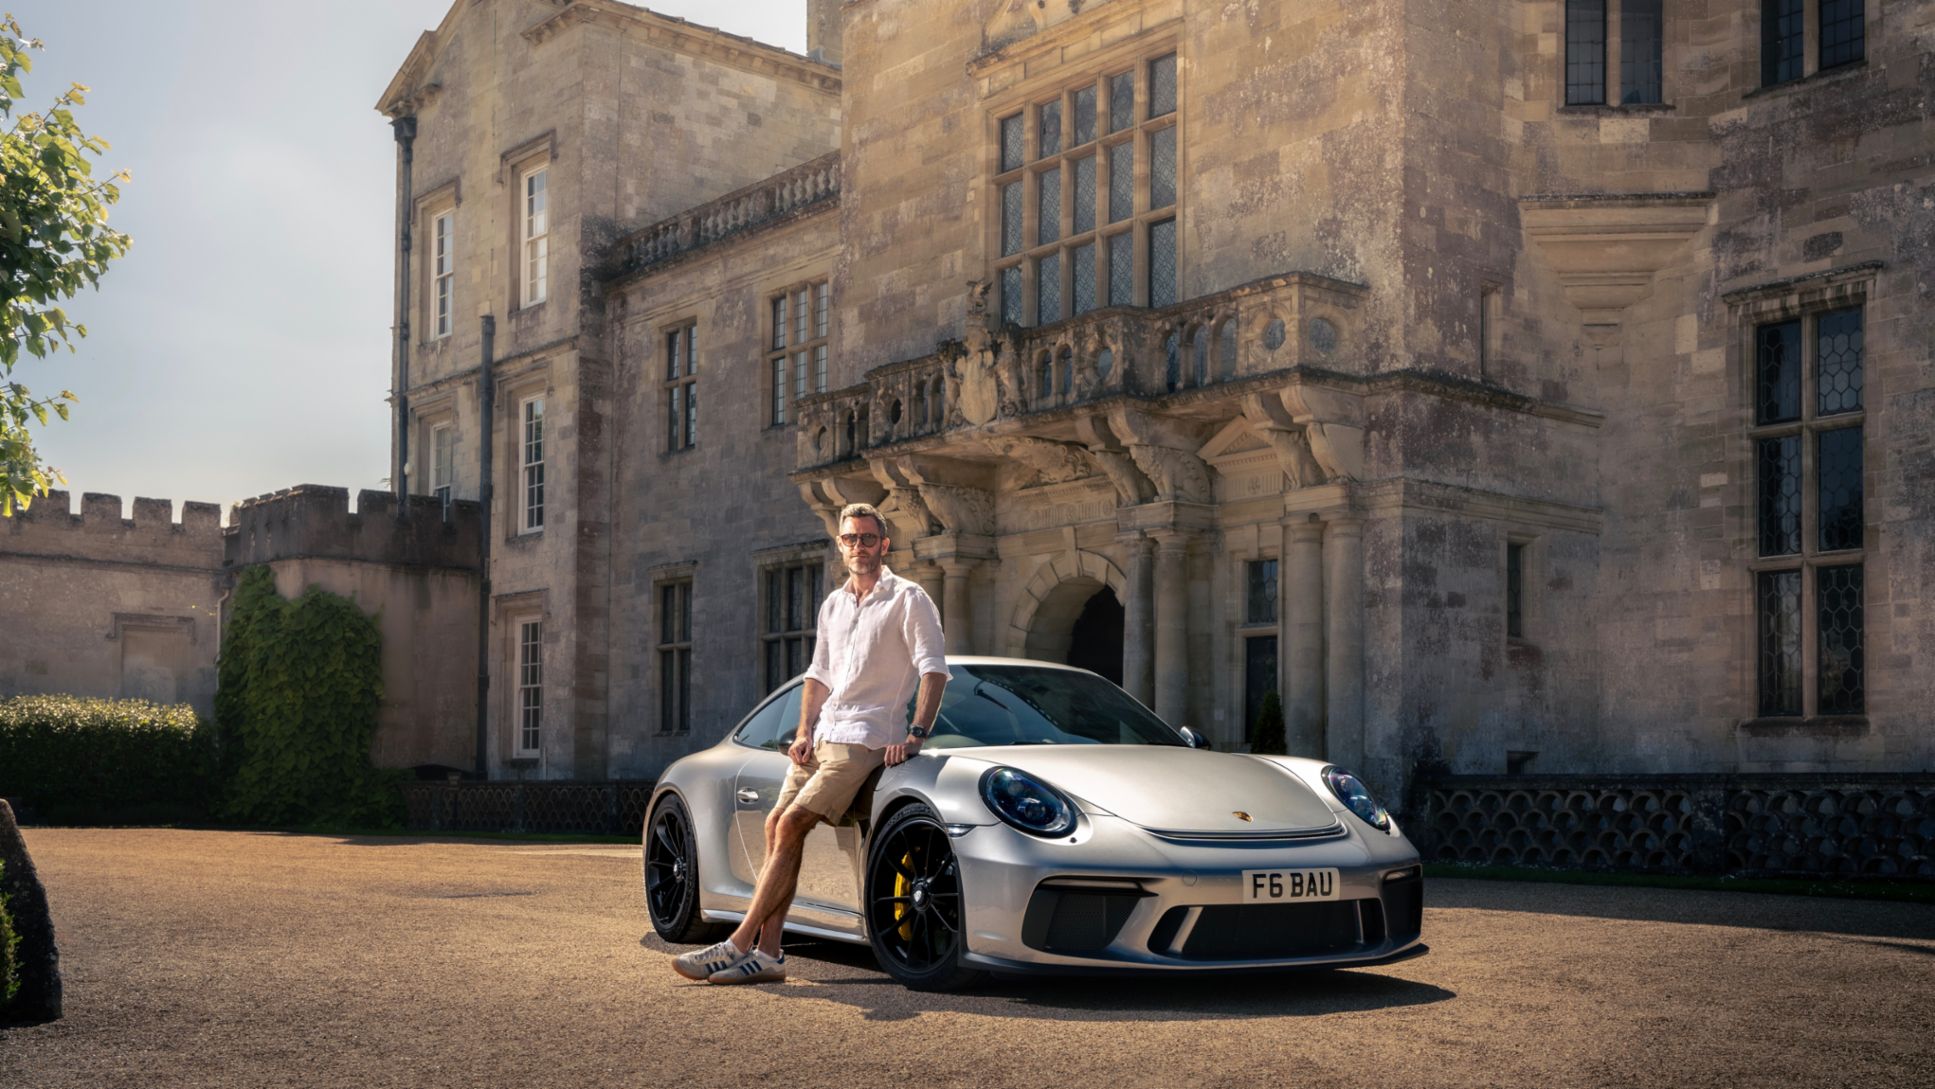 William Herbert, 18th Earl of Pembroke, 911 GT3 with Touring Package (991.2), Wilton House, Great Britain, 2022, Porsche AG